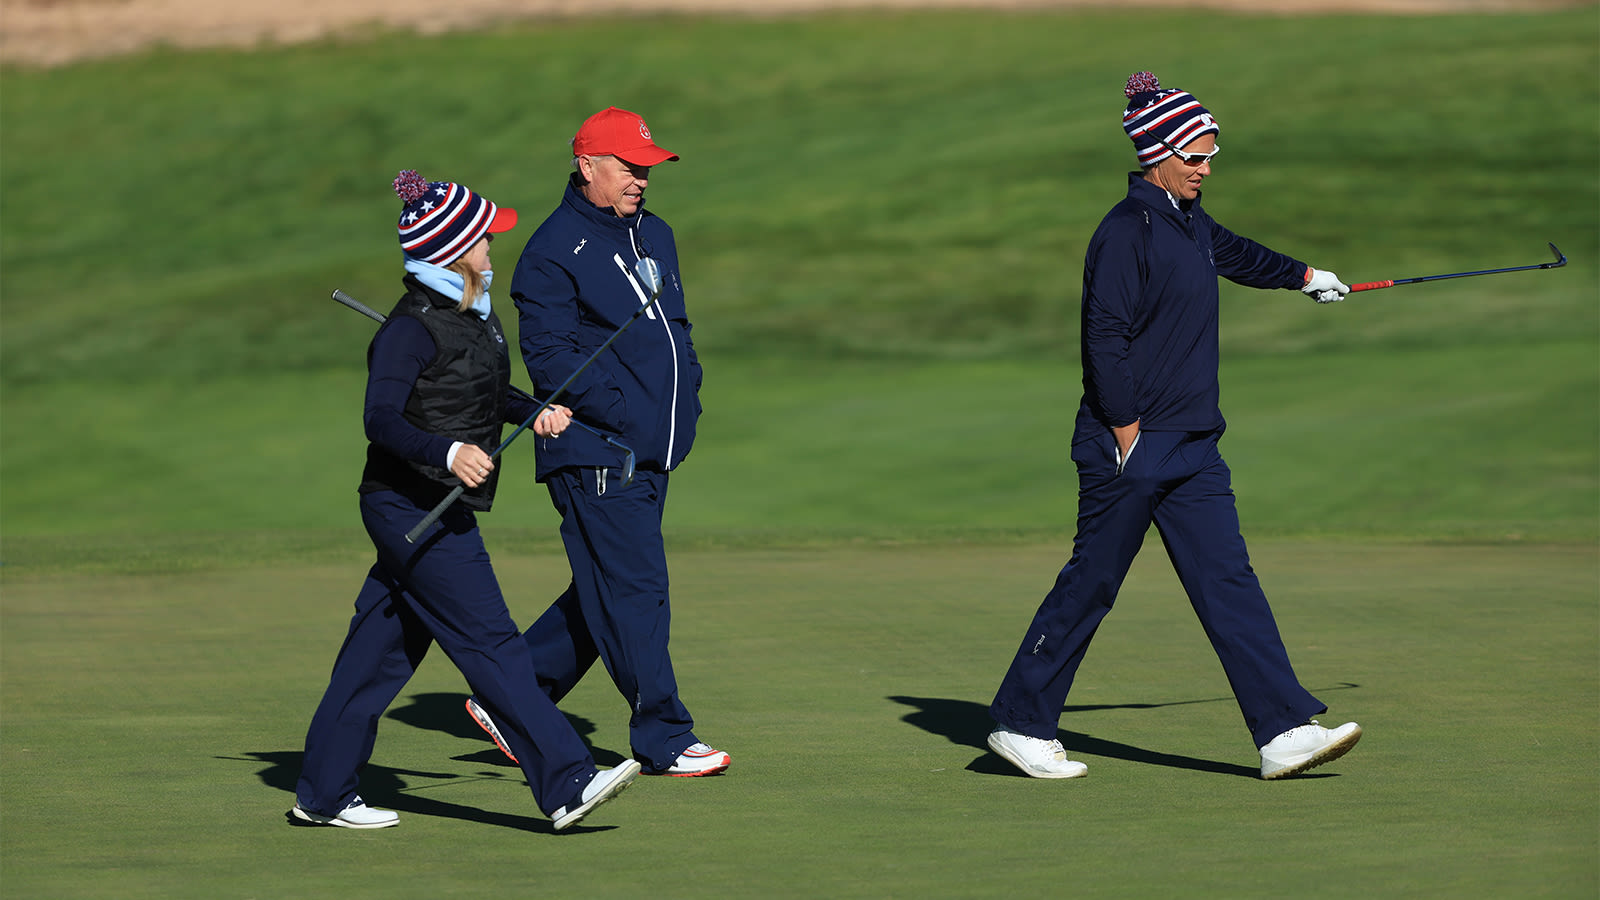 Team USA Captain and PGA America President, Jim Richerson walks with Stephanie Connelly-Eiswerth and Jennifer Borocz during a practice round for the 2nd PGA Women's Cup at Twin Warriors Golf Club on Tuesday, October 25, 2022 in Santa Ana Pueblo, New Mexico. (Photo by Sam Greenwood/PGA of America)